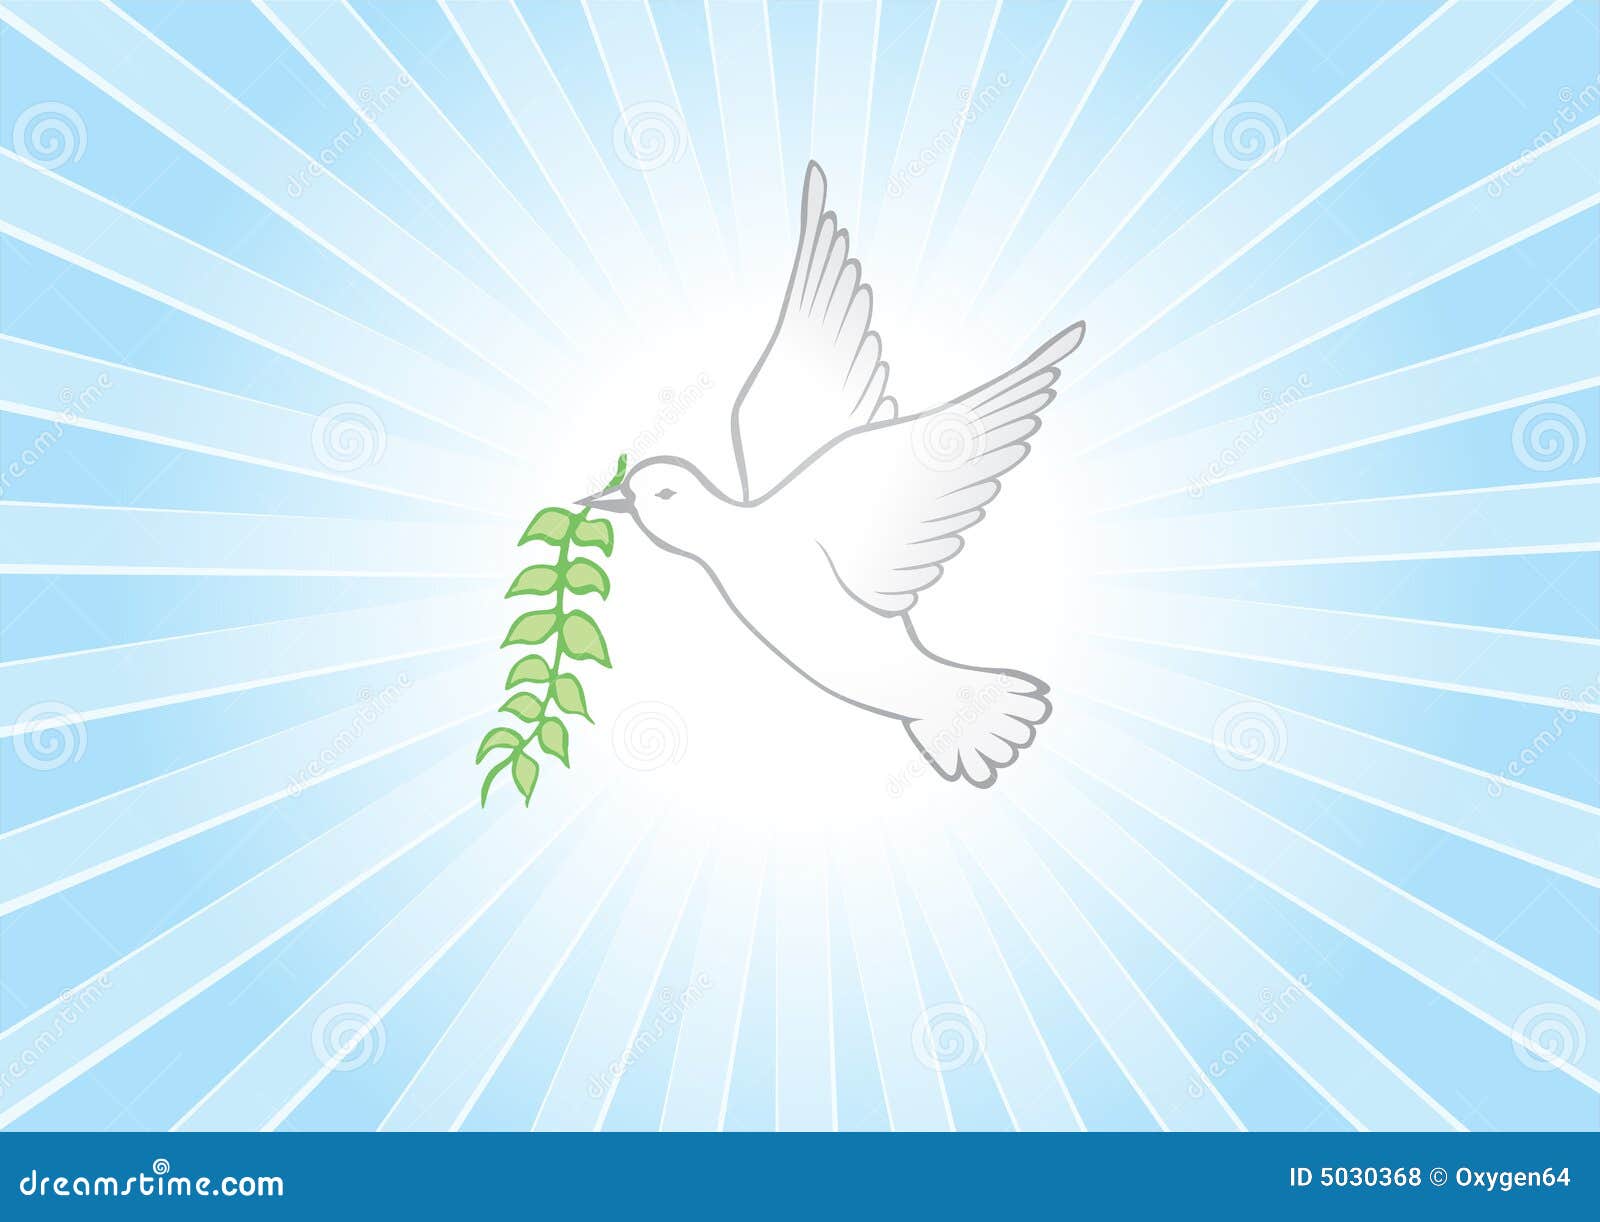 Peace background stock vector. Illustration of peaceful - 5030368